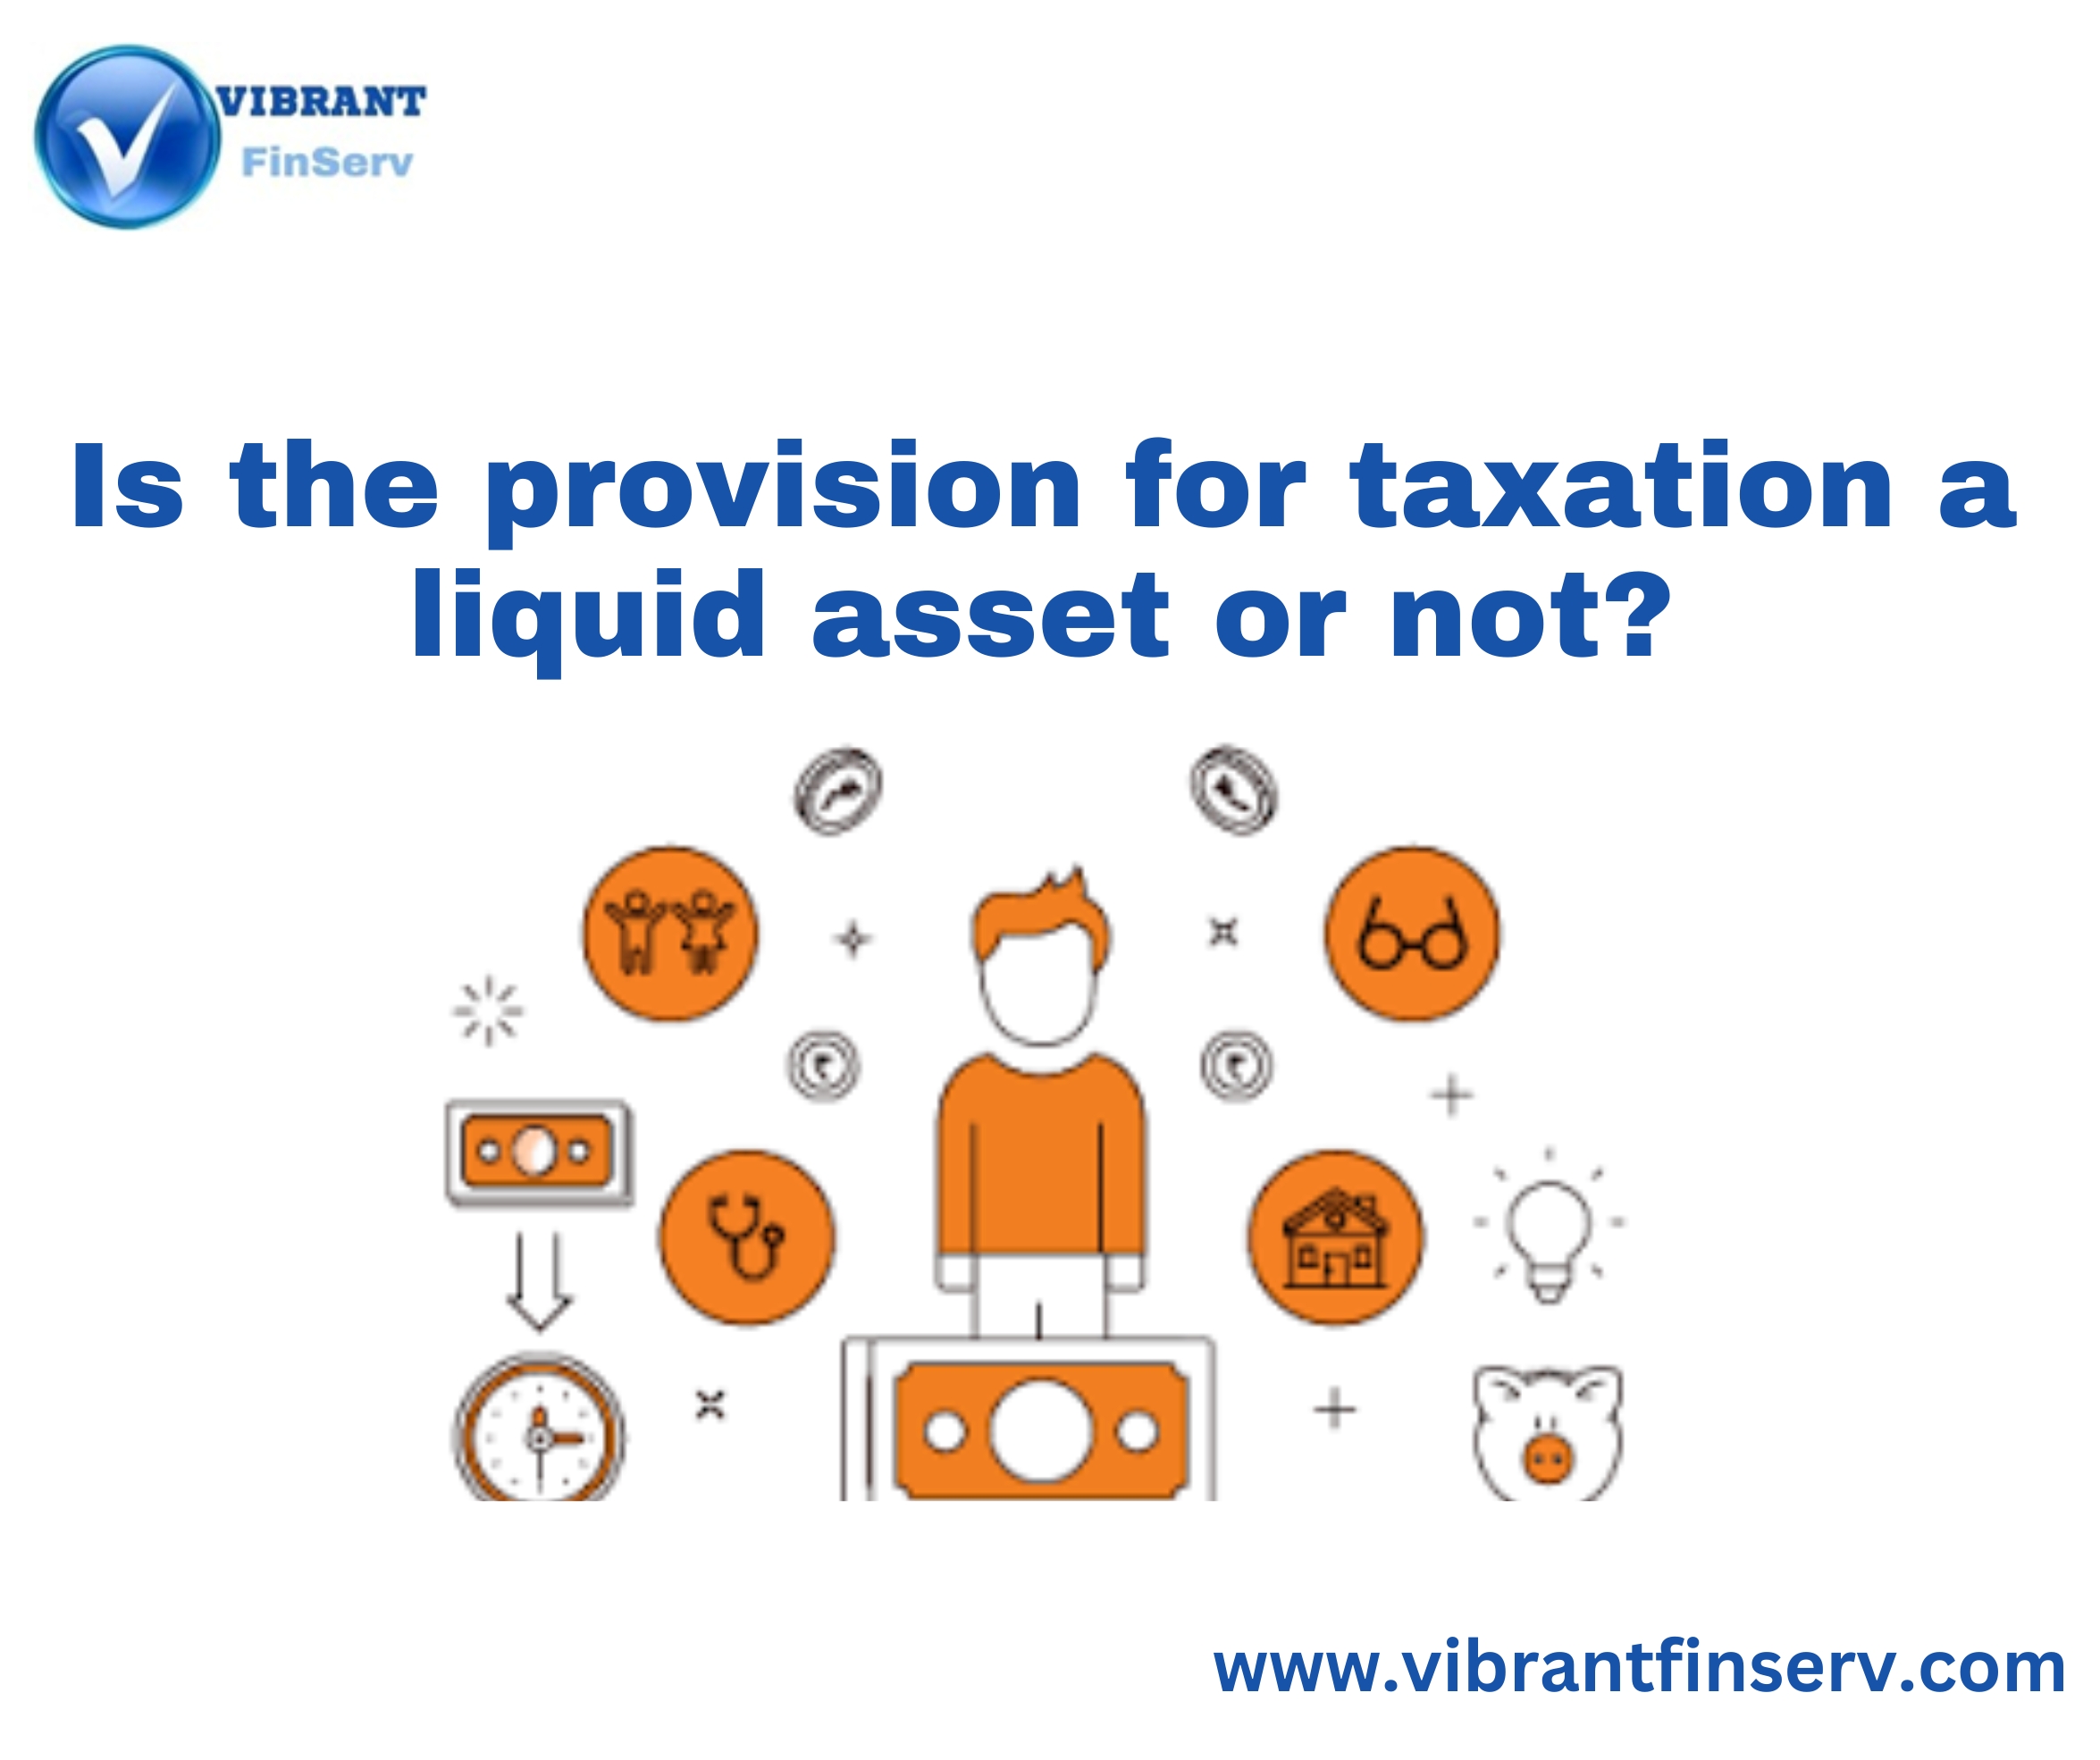 Is the provision for taxation a liquid asset or not